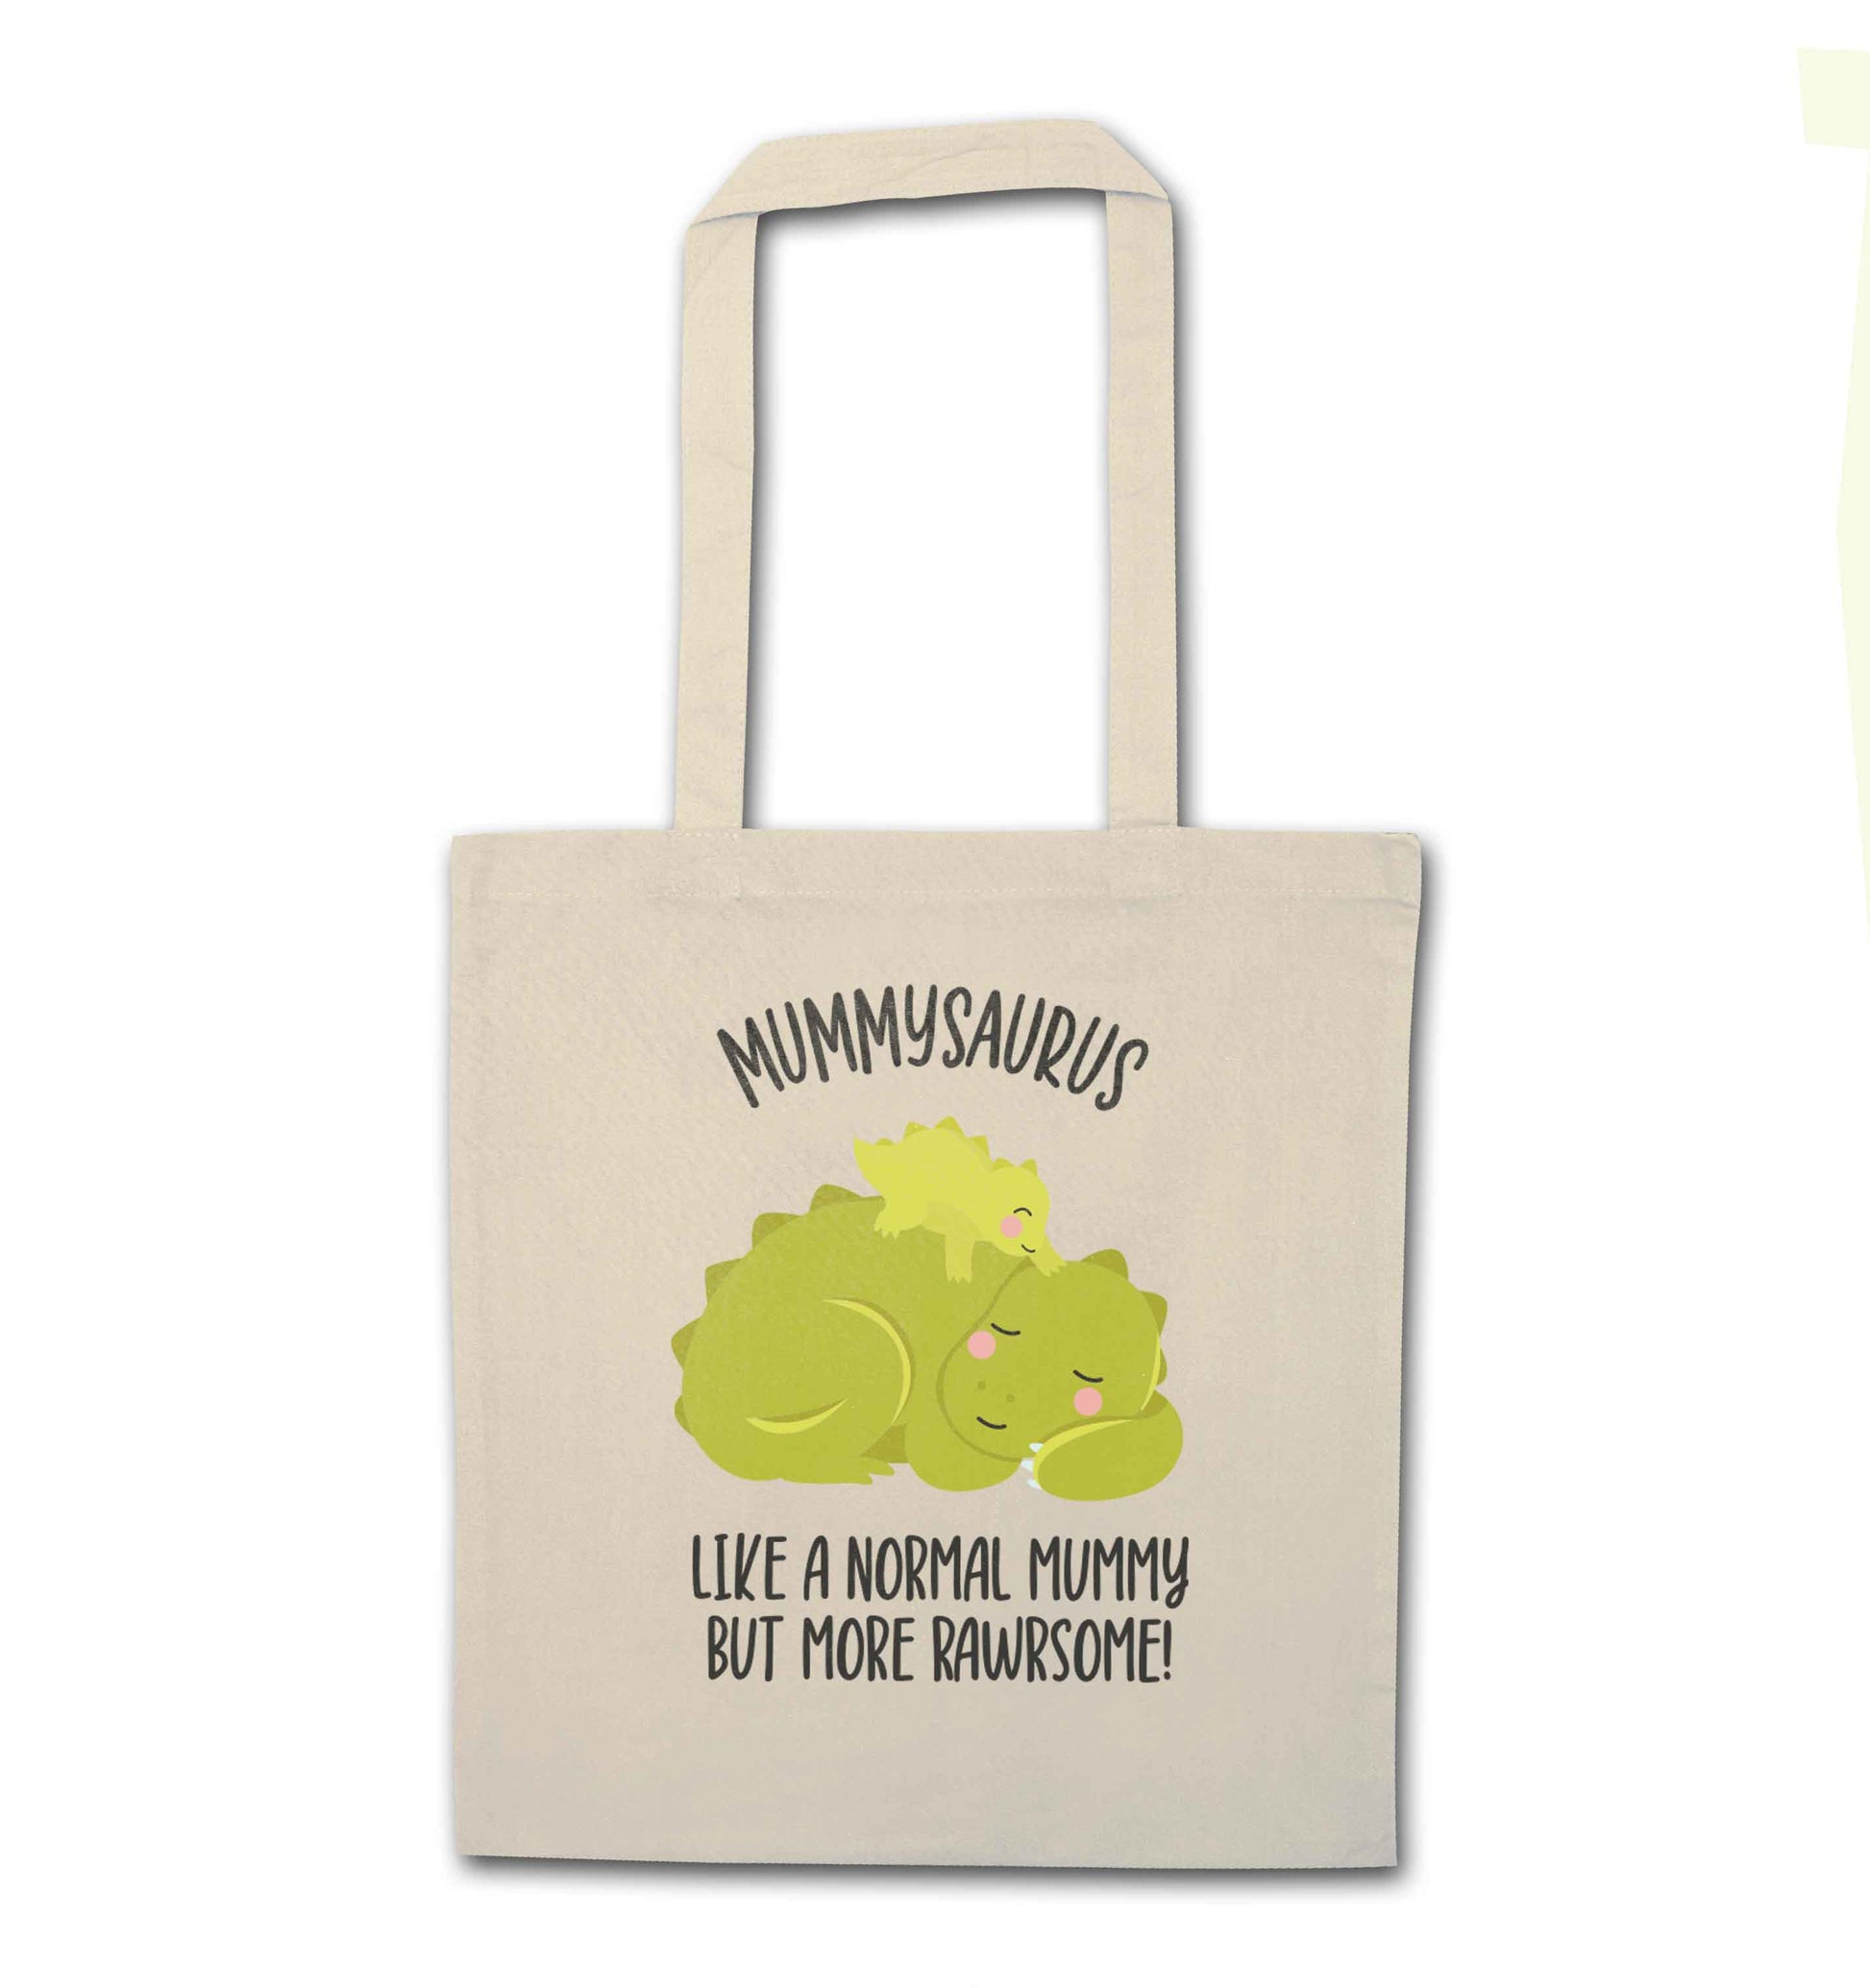 Mummysaurus like a normal mummy only more rawrsome natural tote bag